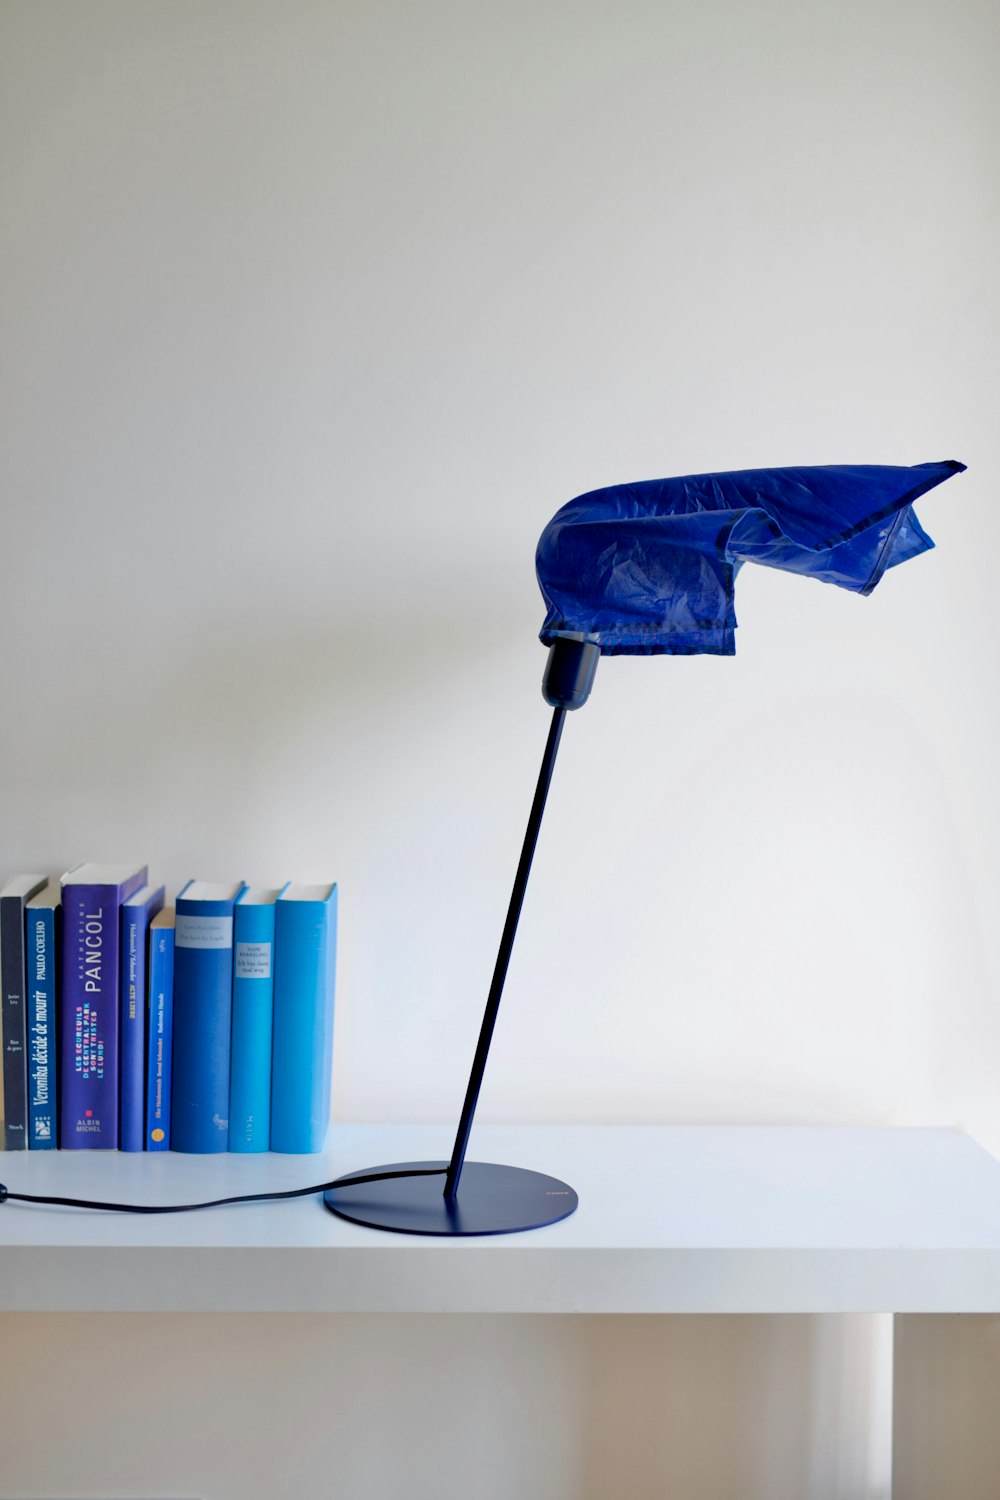 a blue umbrella on a table next to books